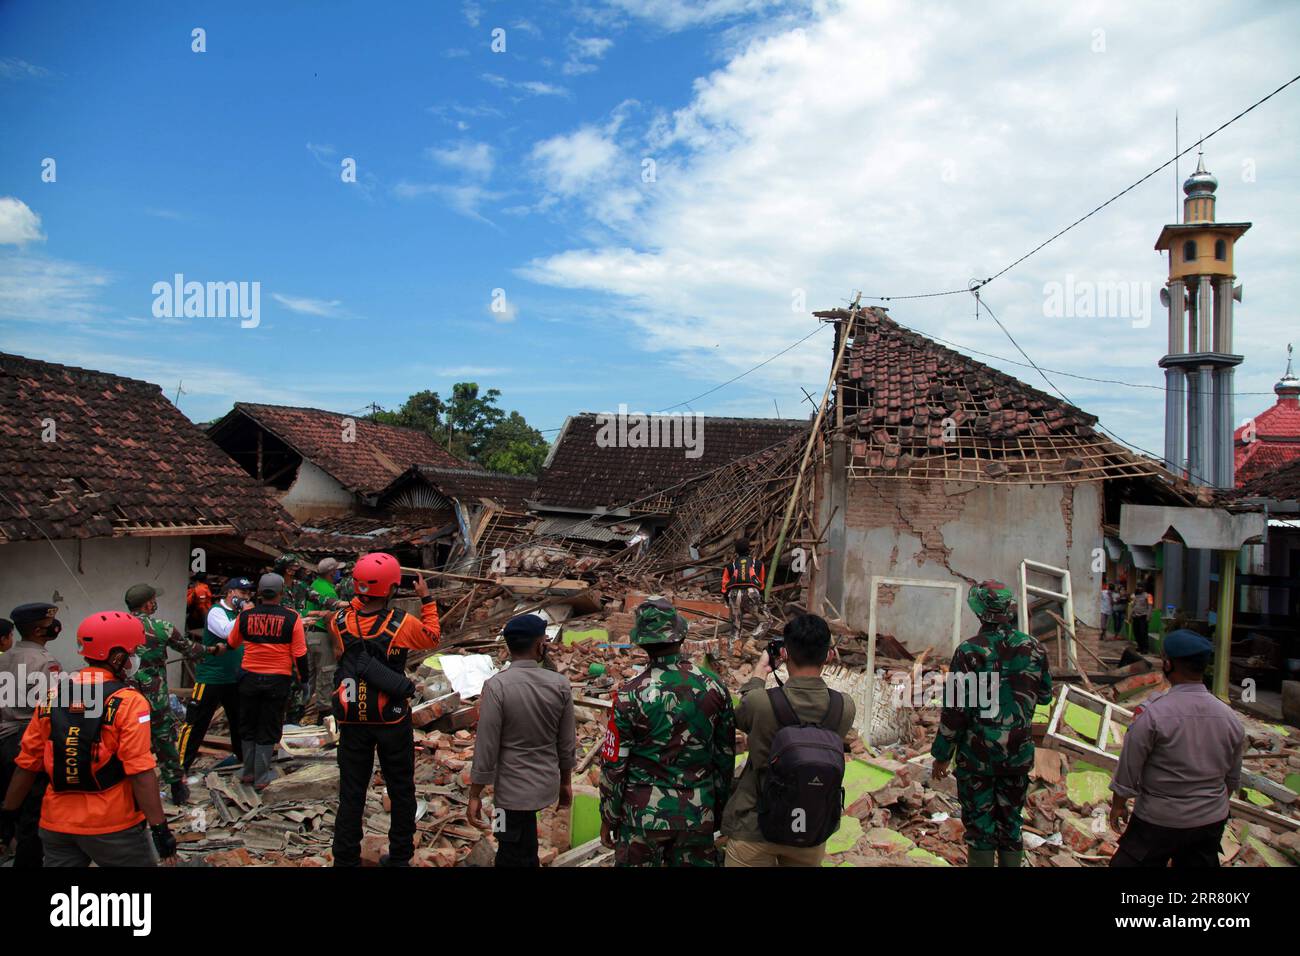 210411 -- EAST JAVA, April 11, 2021 -- Members of search and rescue team are seen near damaged houses after a 6.1 magnitude quake hit Majang Tengah village in Malang, East Java, Indonesia, April 11, 2021. Six people were killed, another one was seriously injured, and scores of buildings were damaged after a 6.1-magnitude quake rocked Indonesia s western province of East Java on Saturday, officials said. The earthquake struck at 2 p.m. Jakarta time 0700 GMT with the epicenter 96 km south of Kepanjen town of Malang district with a depth of 80 km, Andry Sembiring, an official at the Meteorology, Stock Photo